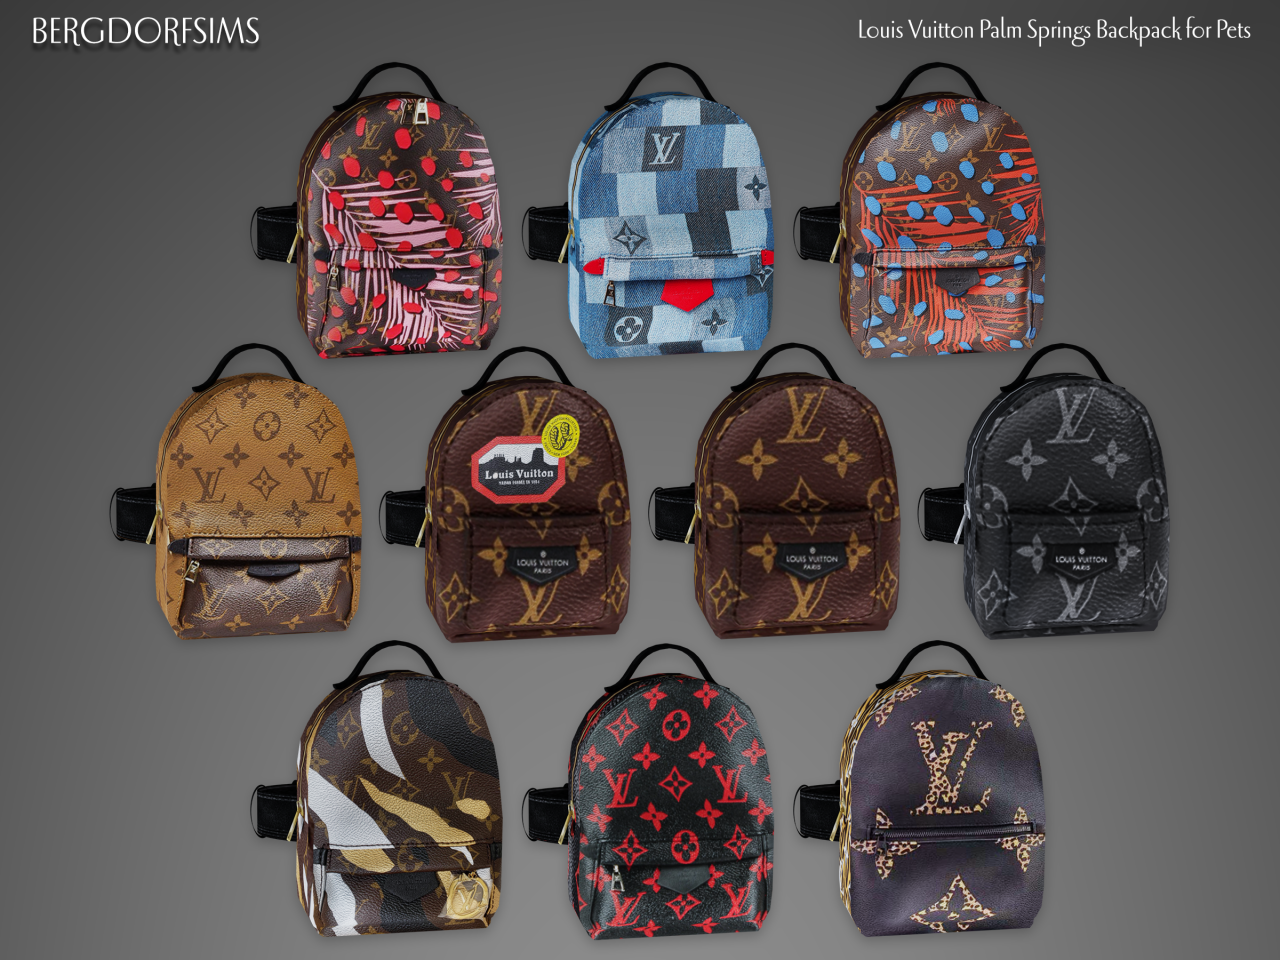 Emily CC Finds — bergdorfsims: Louis Vuitton Palm Springs Backpack